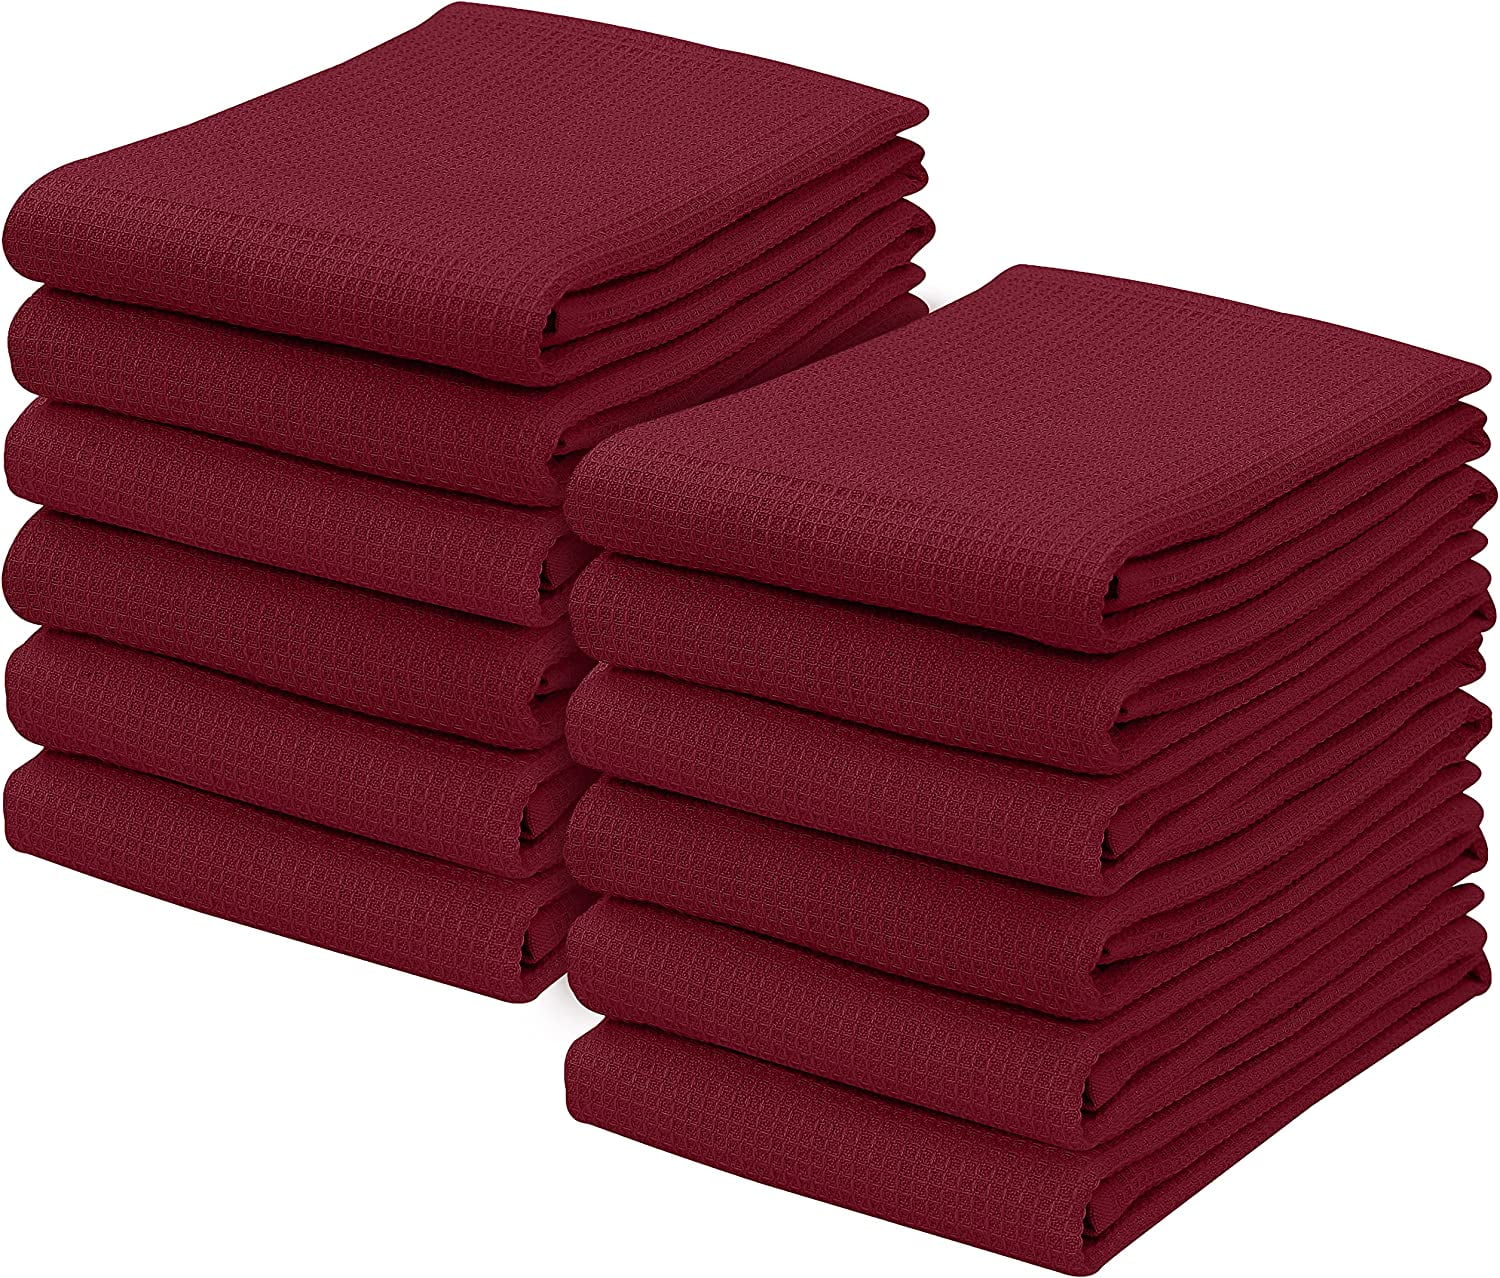 Howarmer Brick Red Kitchen Dish Towels, 100% Cotton Dish Cloths for Washing Dishes, Super Soft and Absorbent Waffle Weave Dish Rags, 6 Pack, Size: 12×